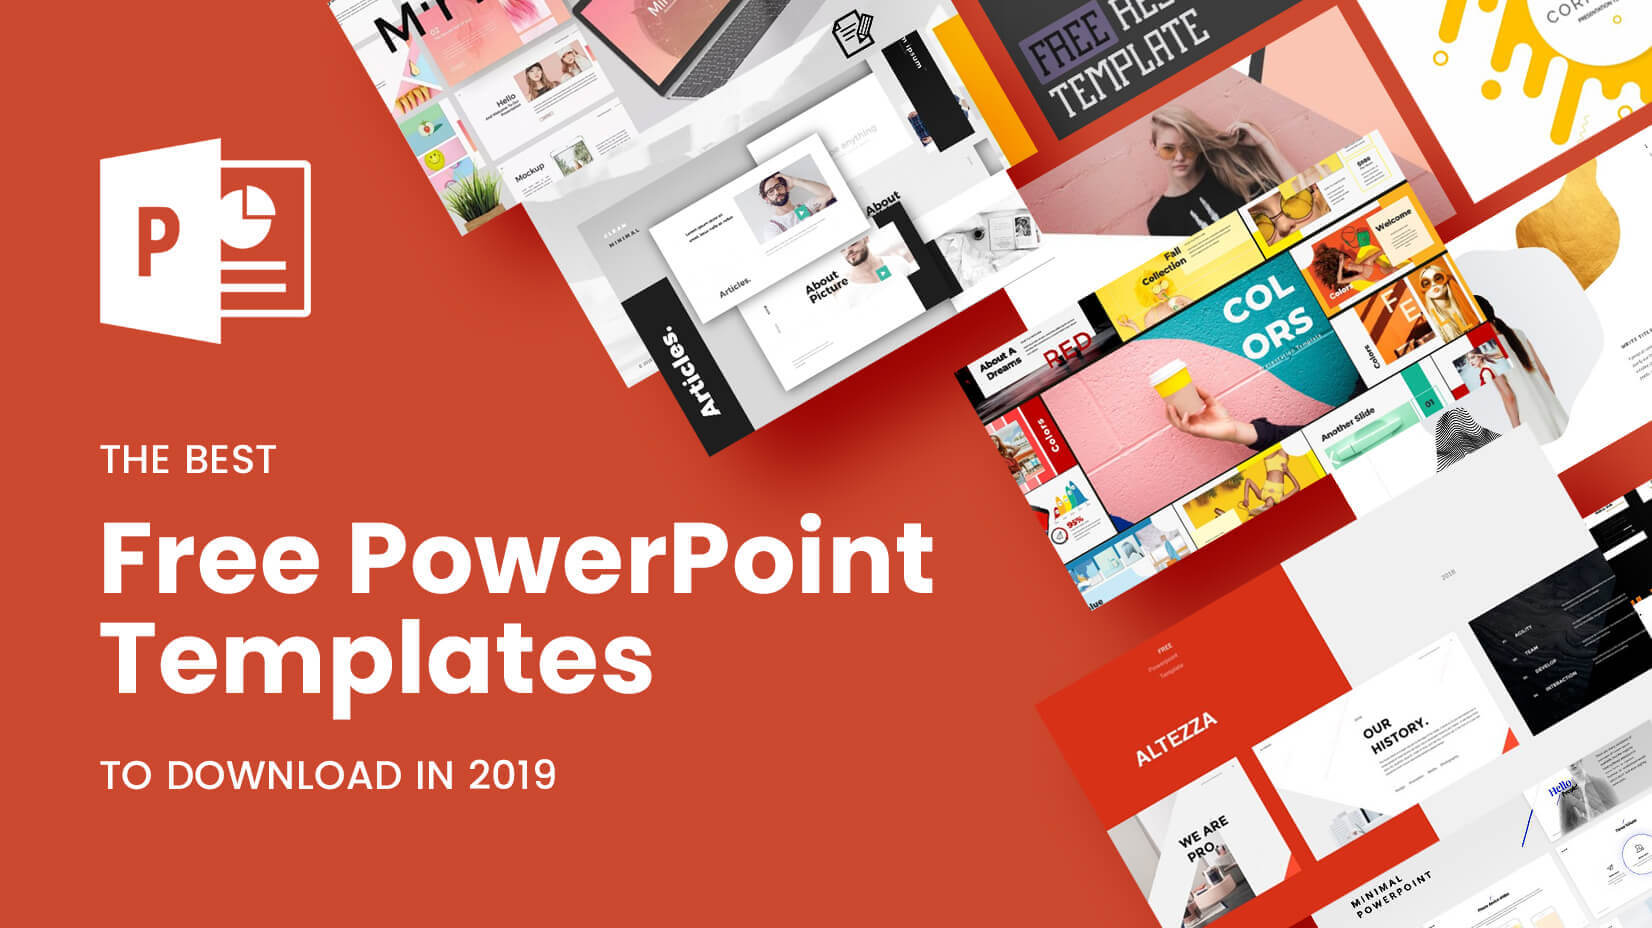 The Best Free Powerpoint Templates To Download In 2019 With Regard To Powerpoint Slides Design Templates For Free